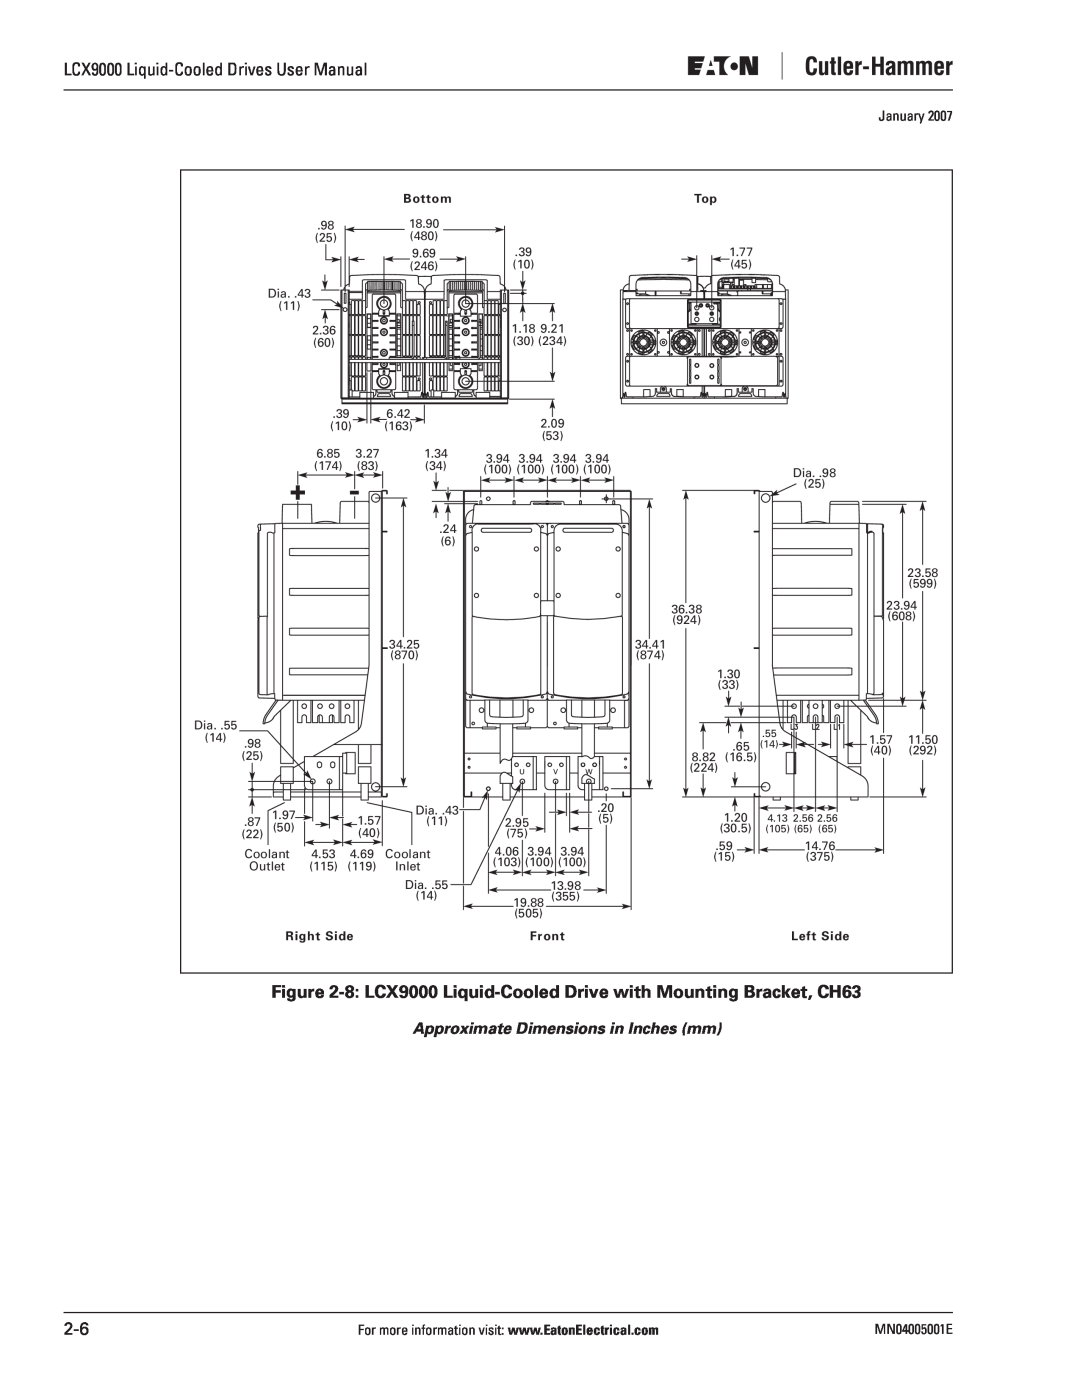 J. T. Eaton 8 LCX9000 Liquid-Cooled Drive with Mounting Bracket, CH63, LCX9000 Liquid-Cooled Drives User Manual 